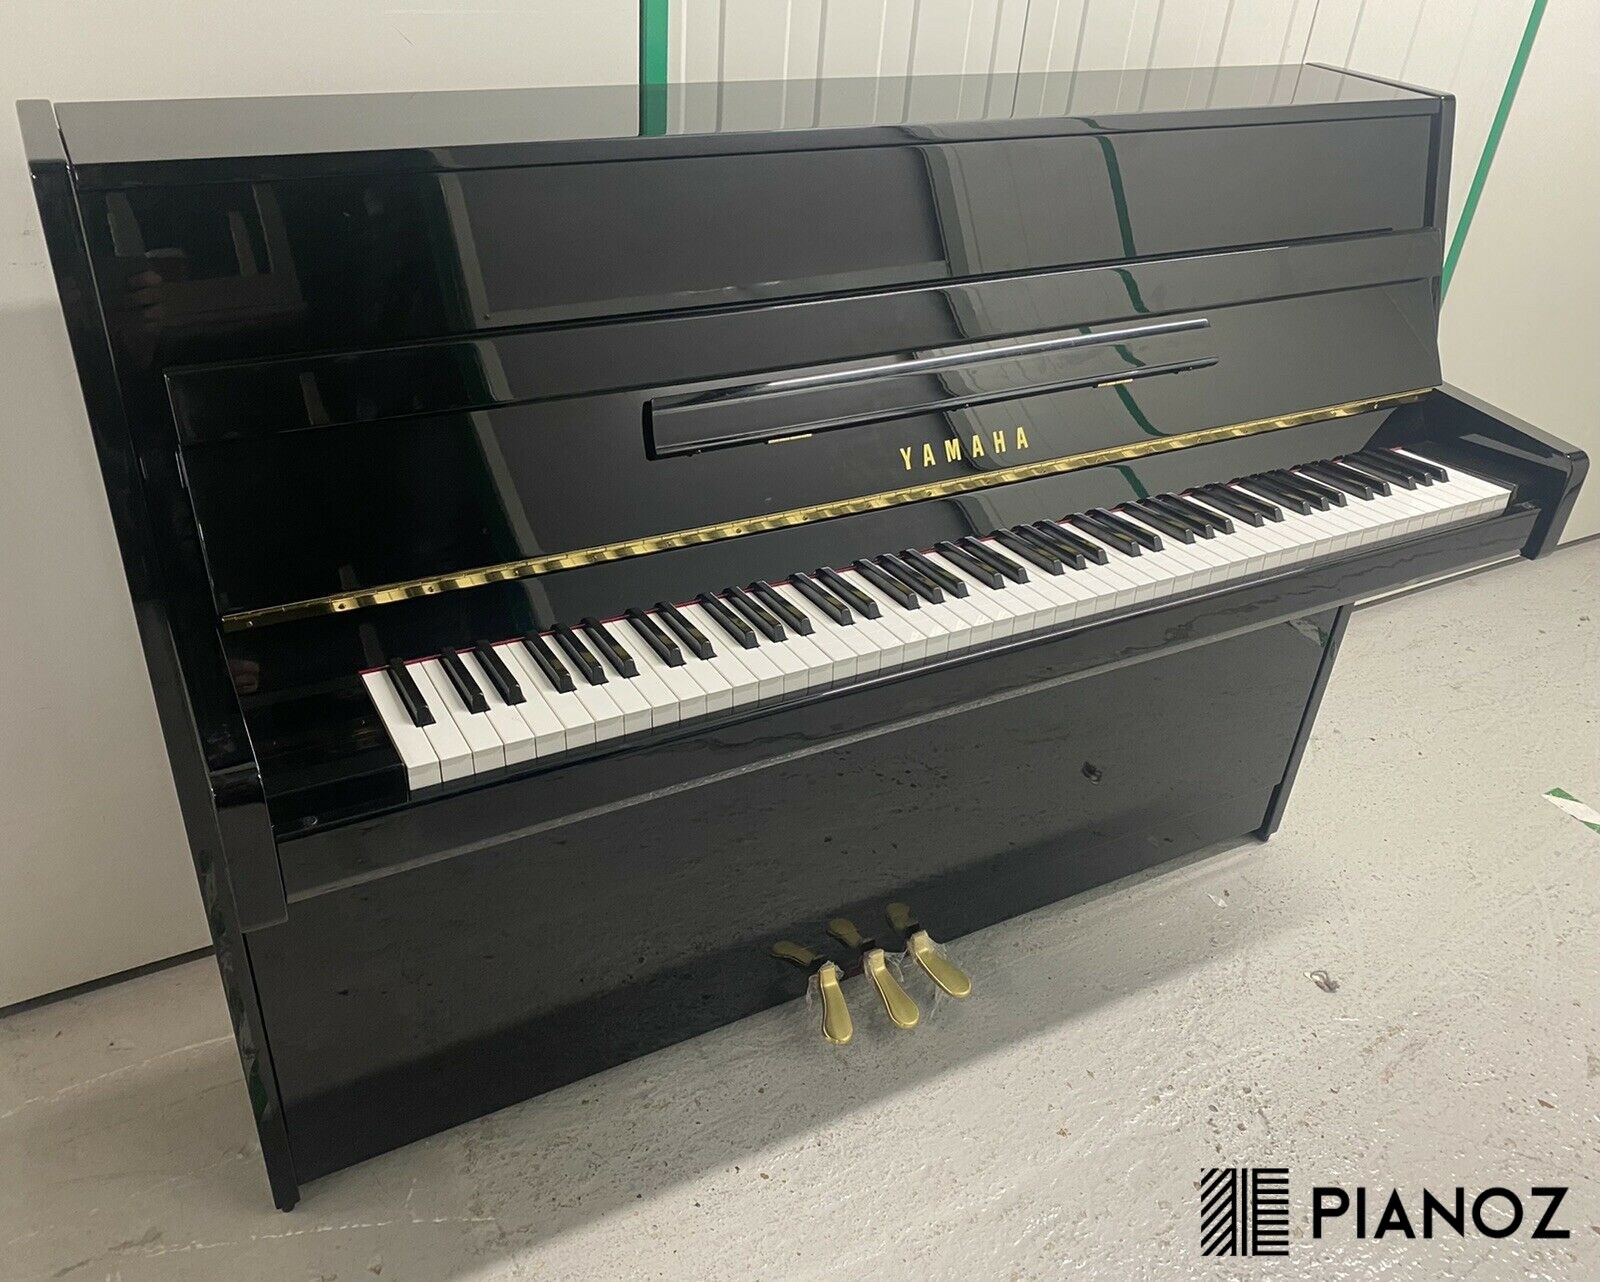 Yamaha B1 Upright Piano piano for sale in UK